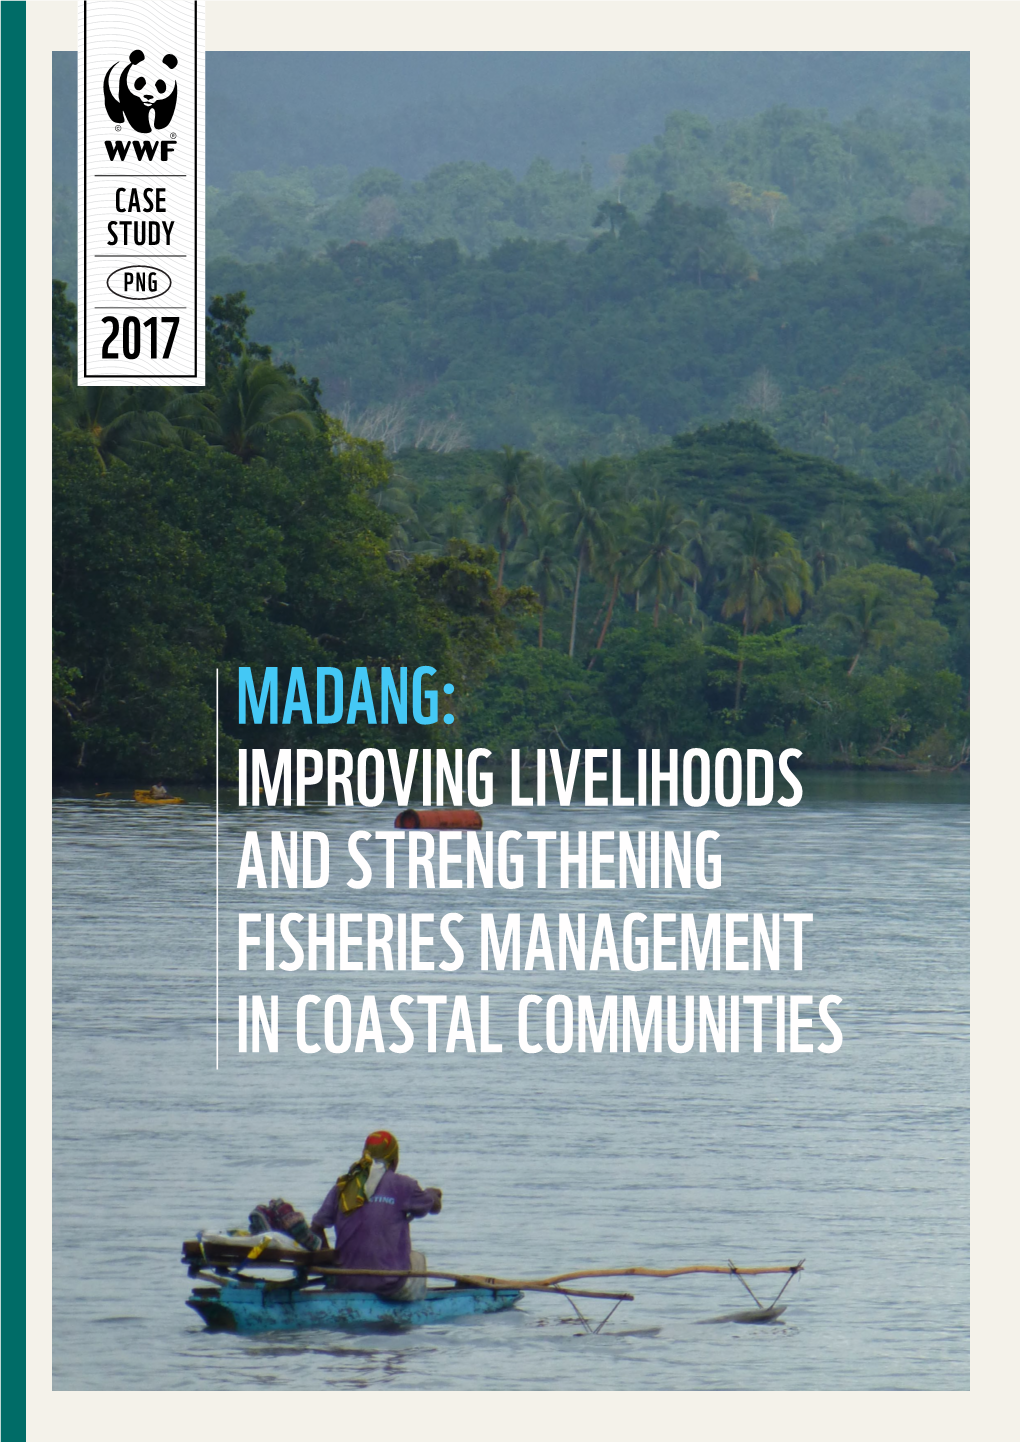 Madang: Improving Livelihoods and Strengthening Fisheries Management in Coastal Communities